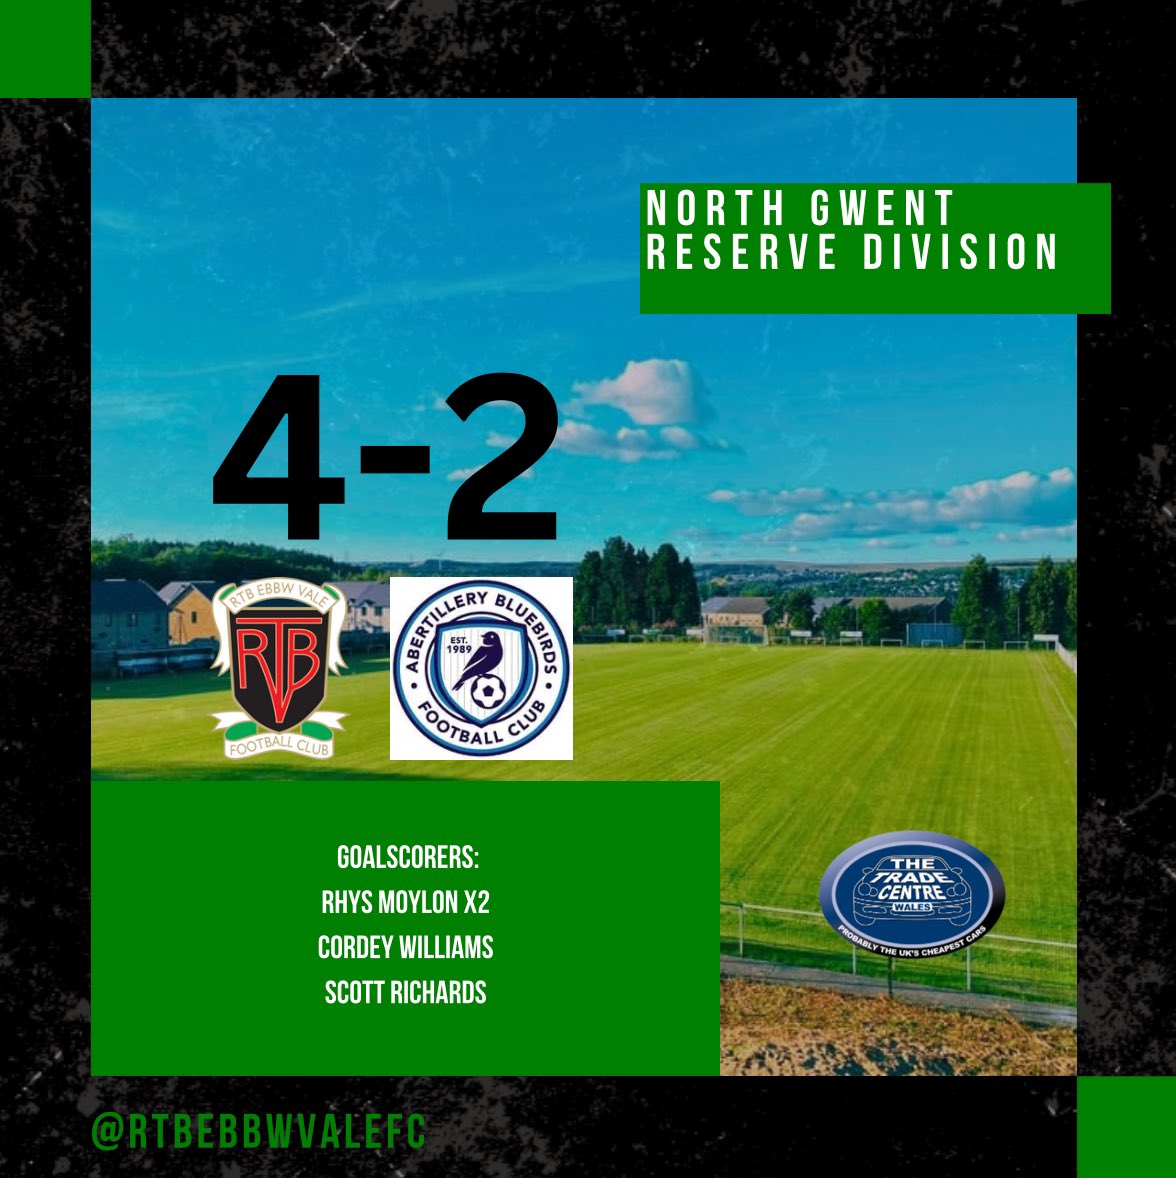 The reserve team come back from two goals down at half time to win at home against @AberBluebirdsFC Thank you to everyone that came to support it is much appreciated👏🏼 #Tss